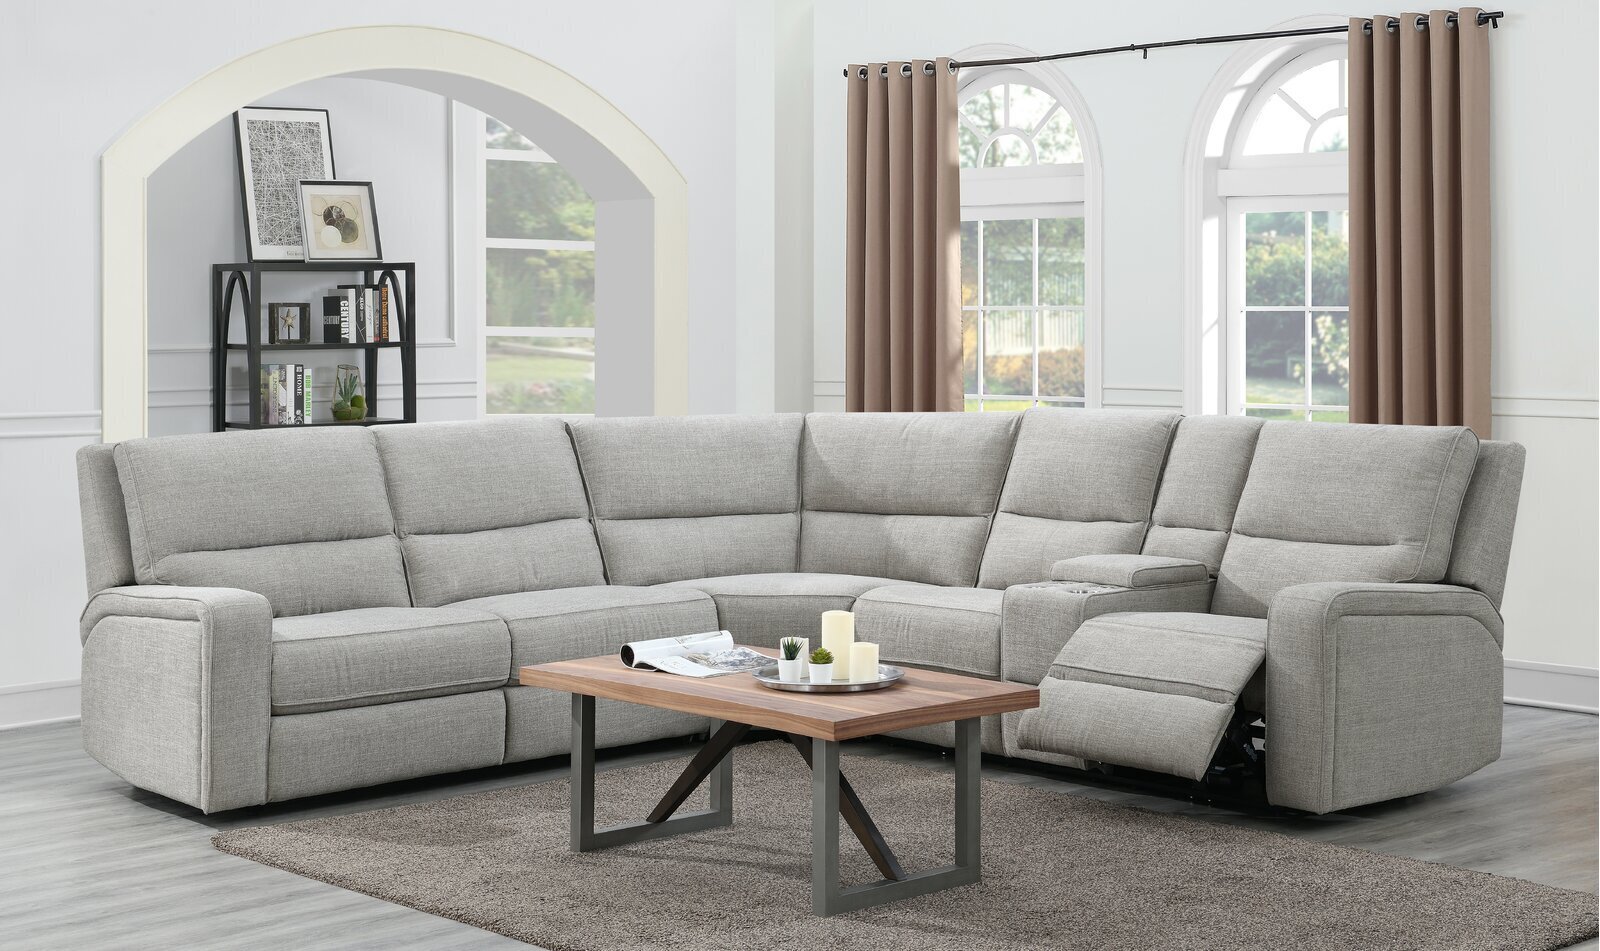 Modern sectional sleeper sofa with recliner seats